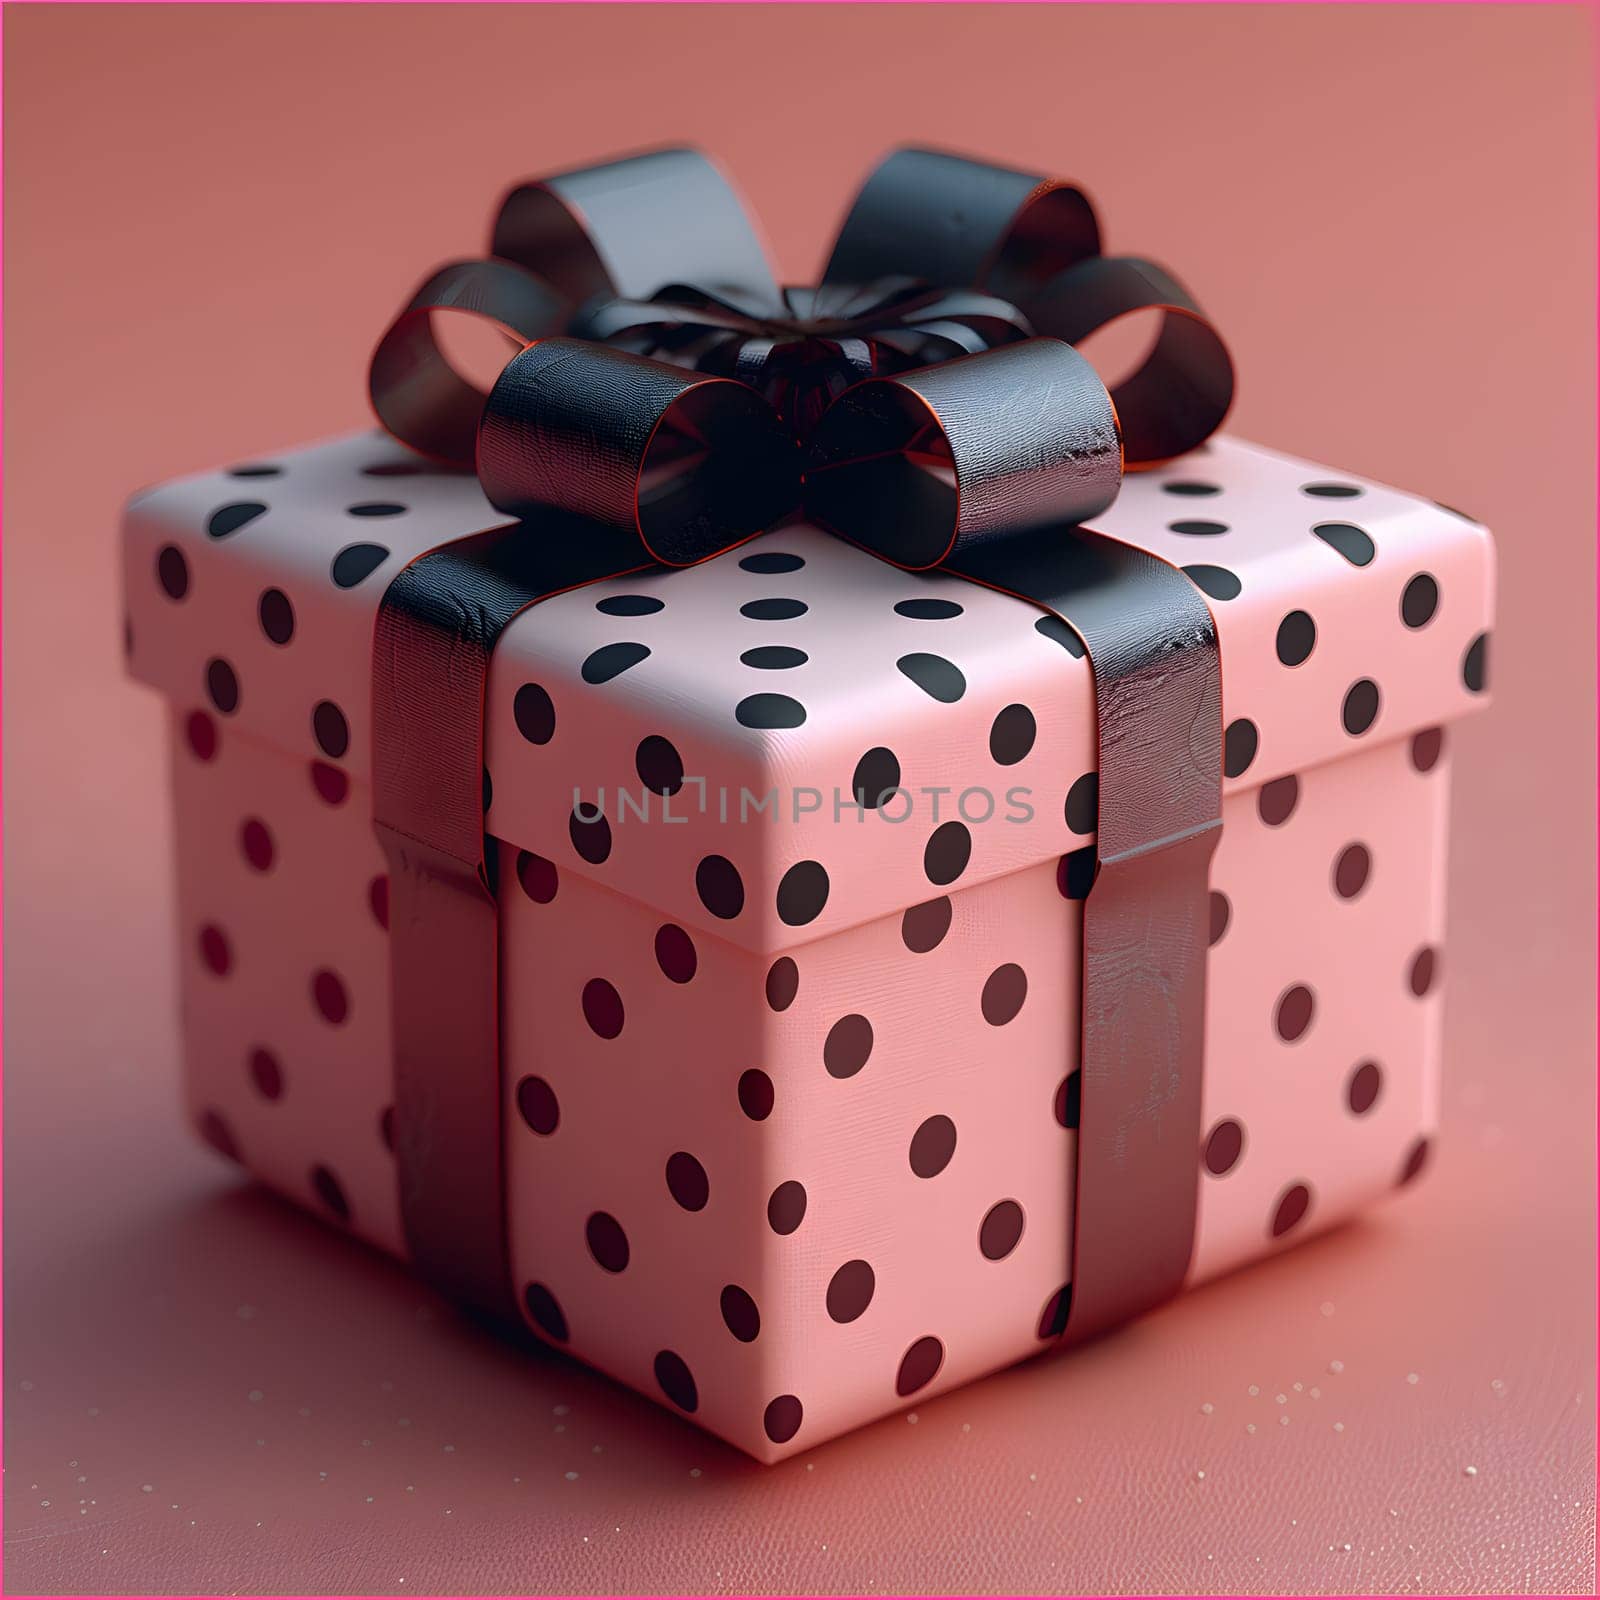 A rectangular pink gift box adorned with black polka dots and a stylish black bow tie. The design is perfect for creative arts enthusiasts looking to make a fashionable statement